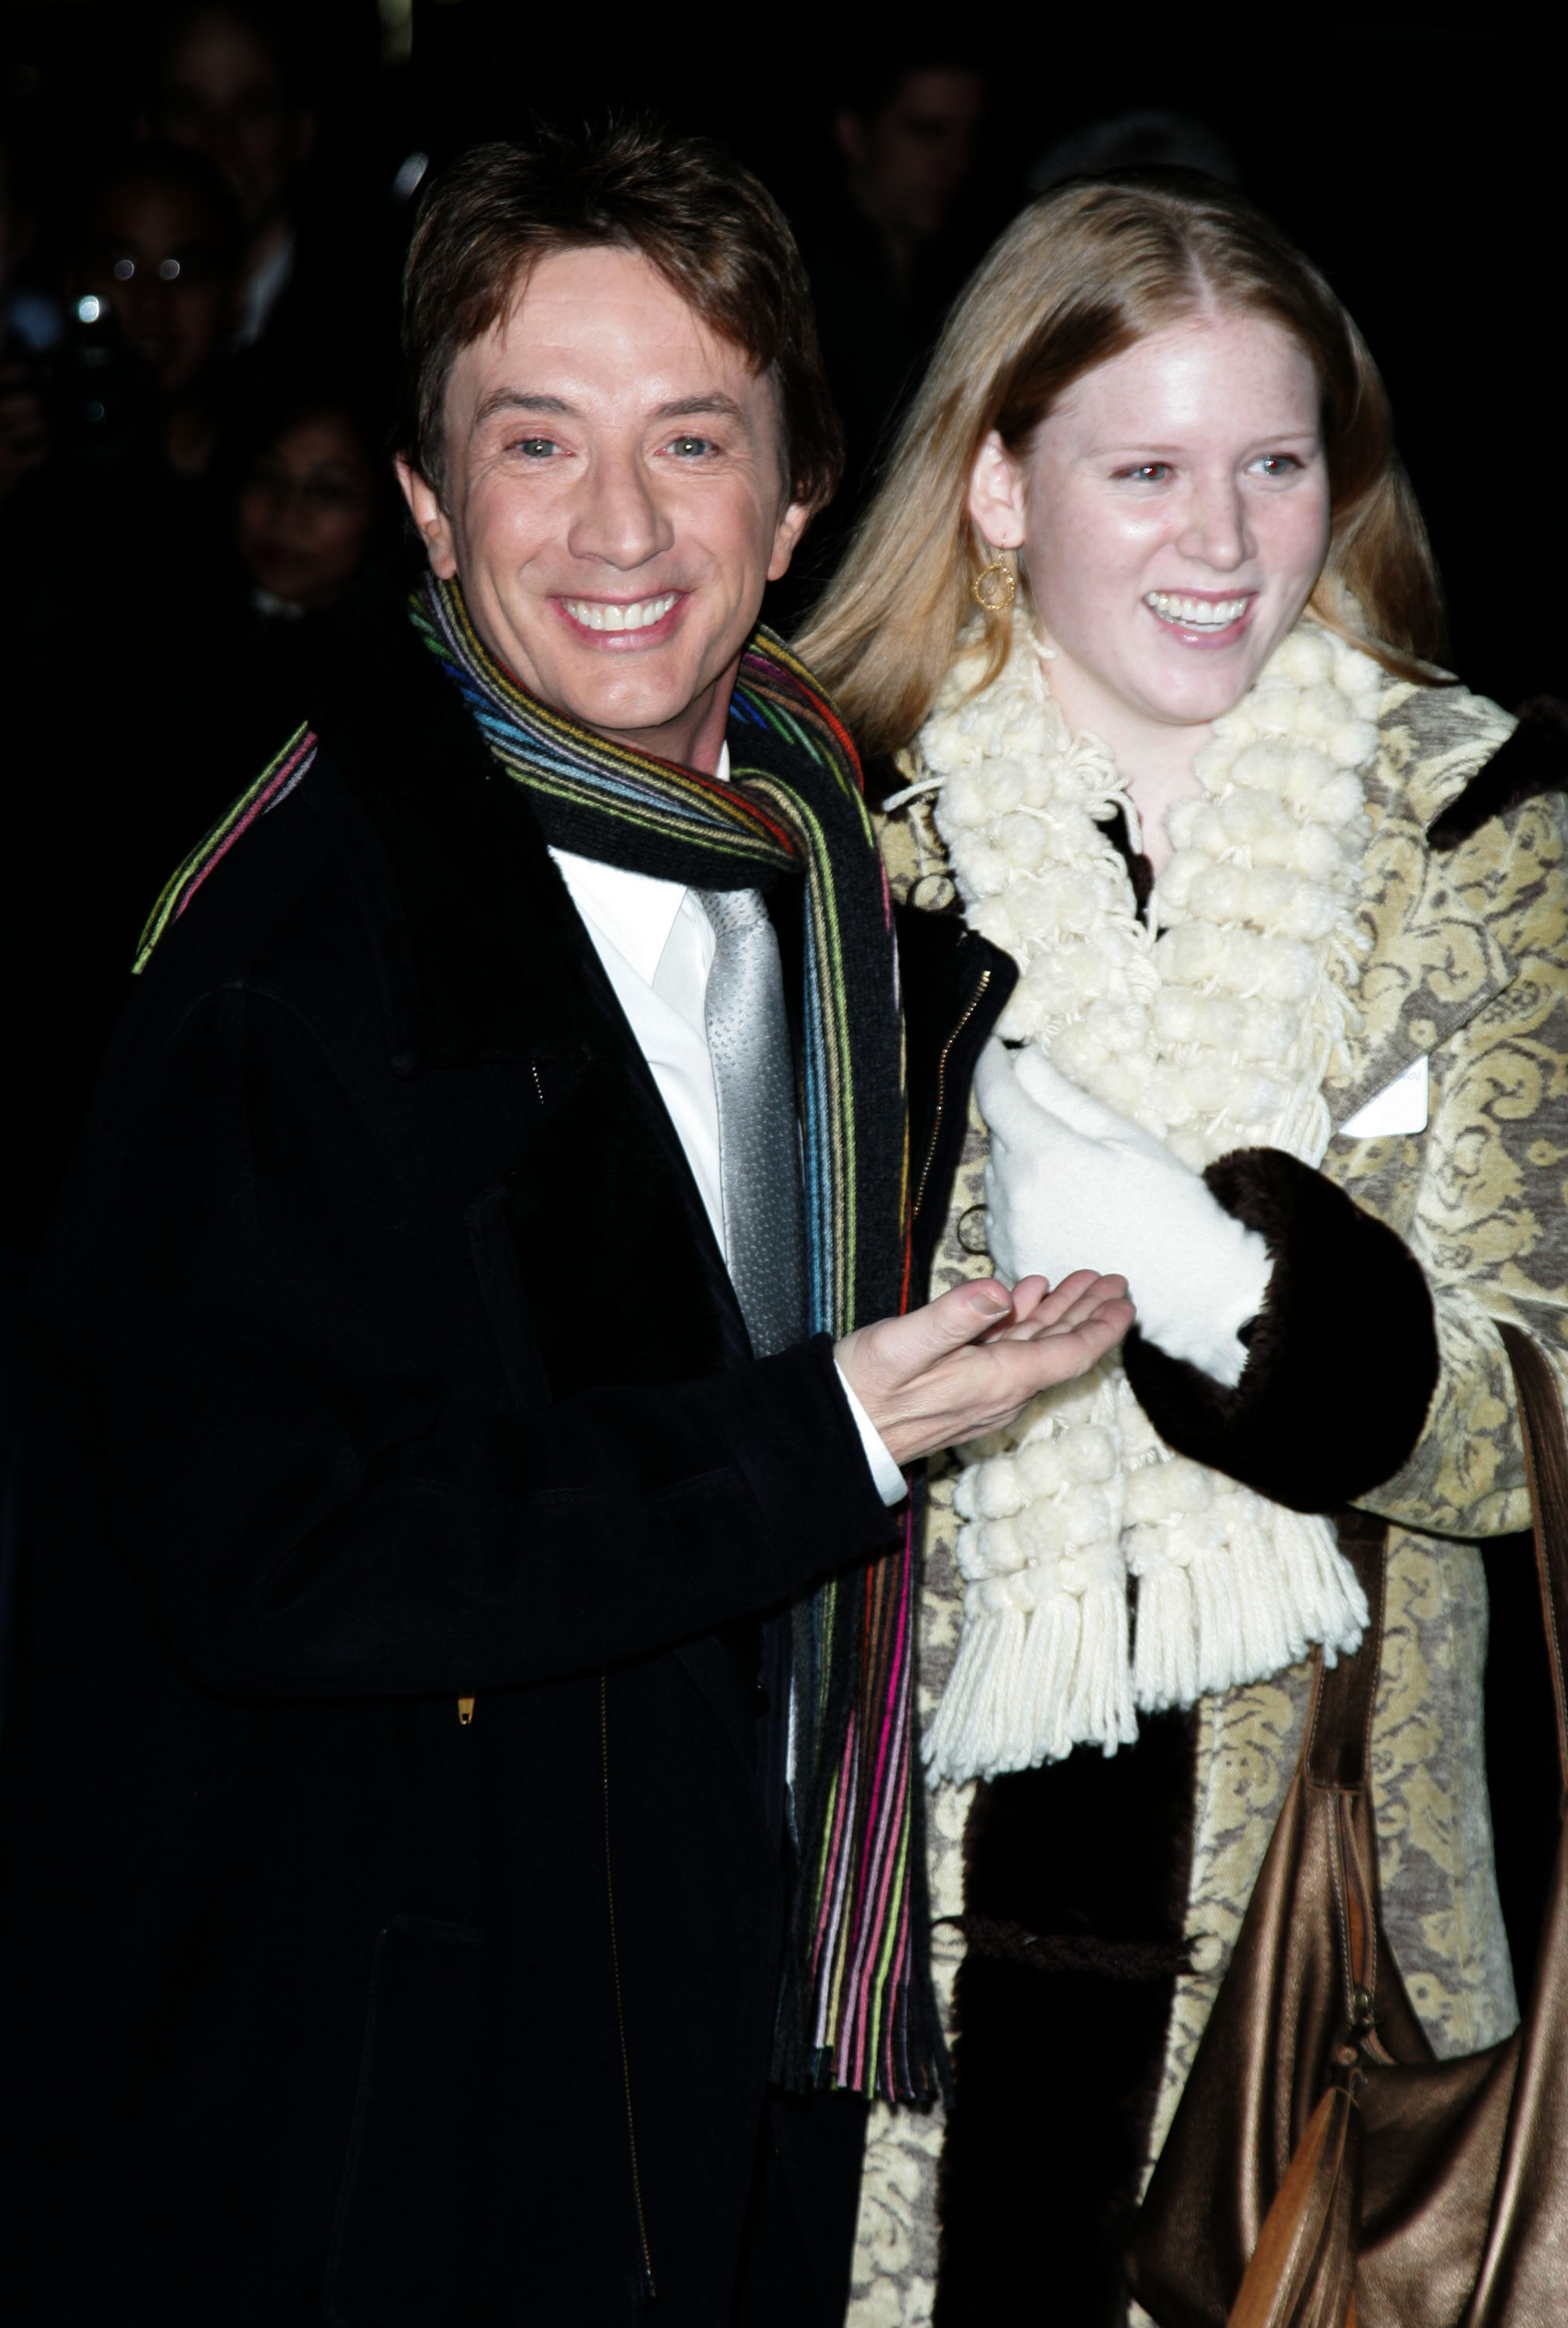 Martin Short and Katherine Elizabeth Short at the "The Late Show With David Letterman" on March 21, 2006, in New York City. | Source: Getty Images